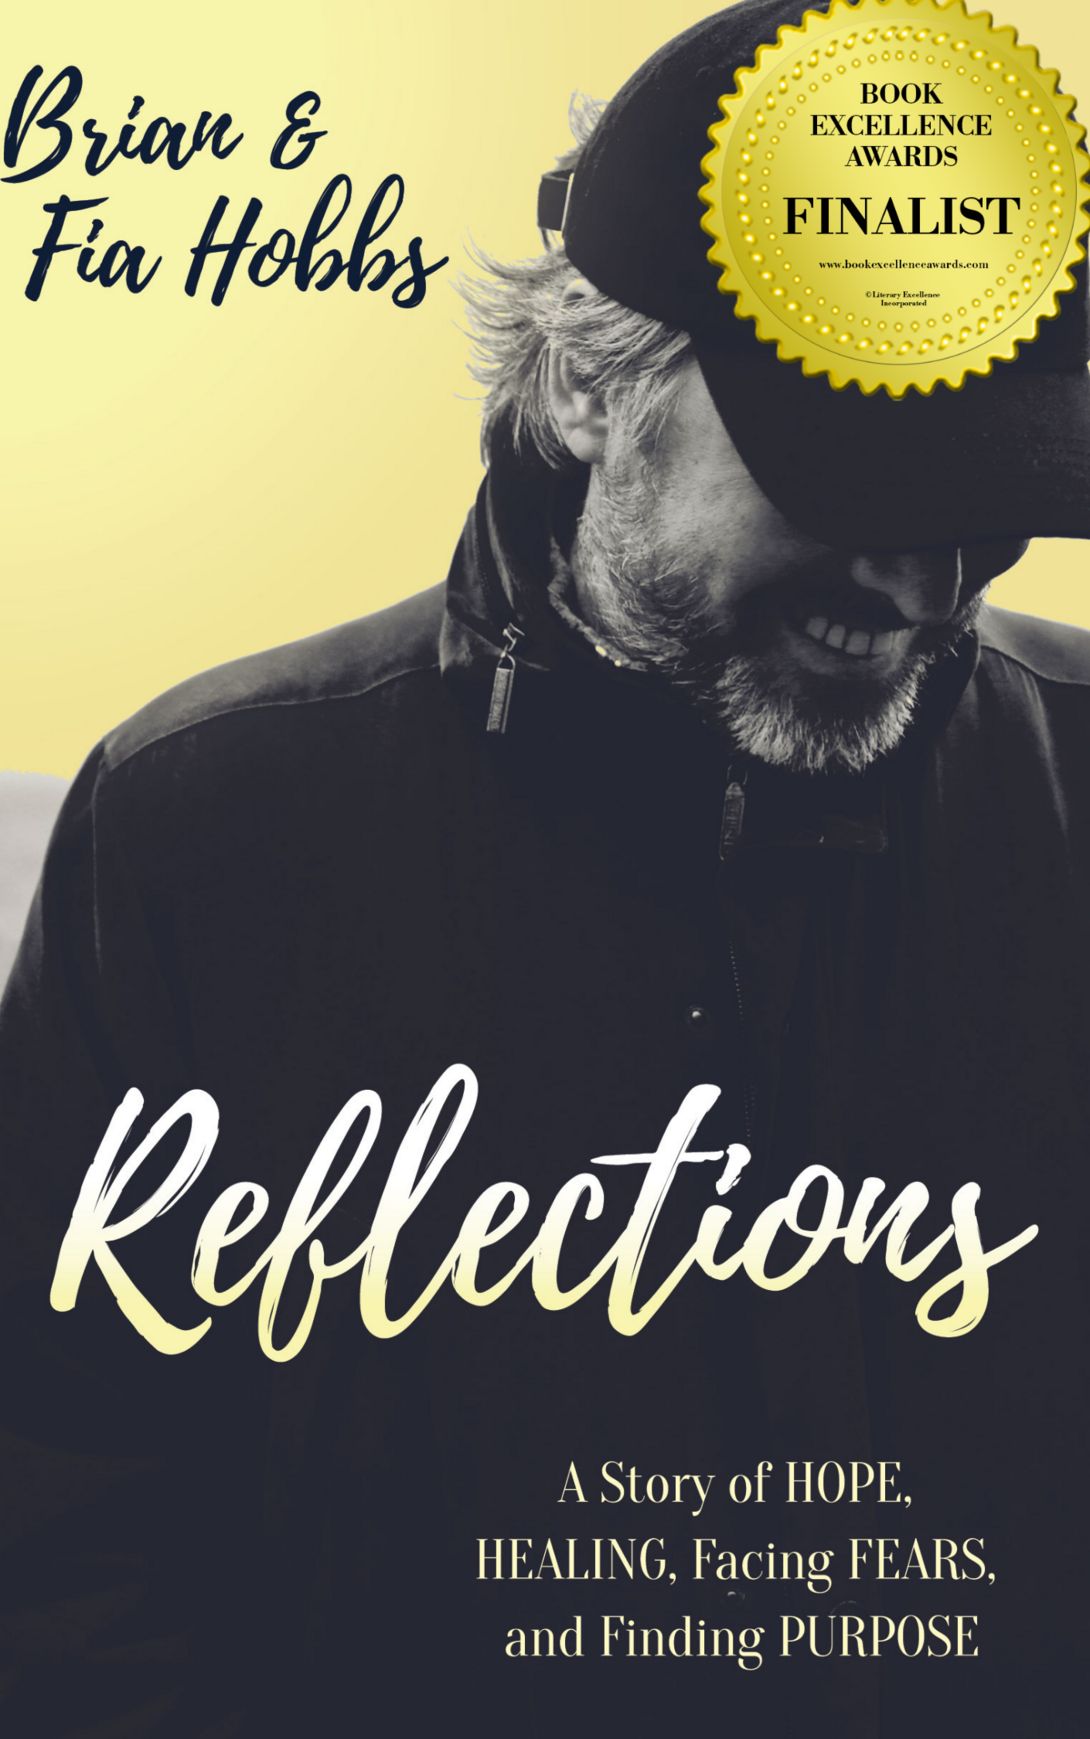 Reflections book cover with finalist award